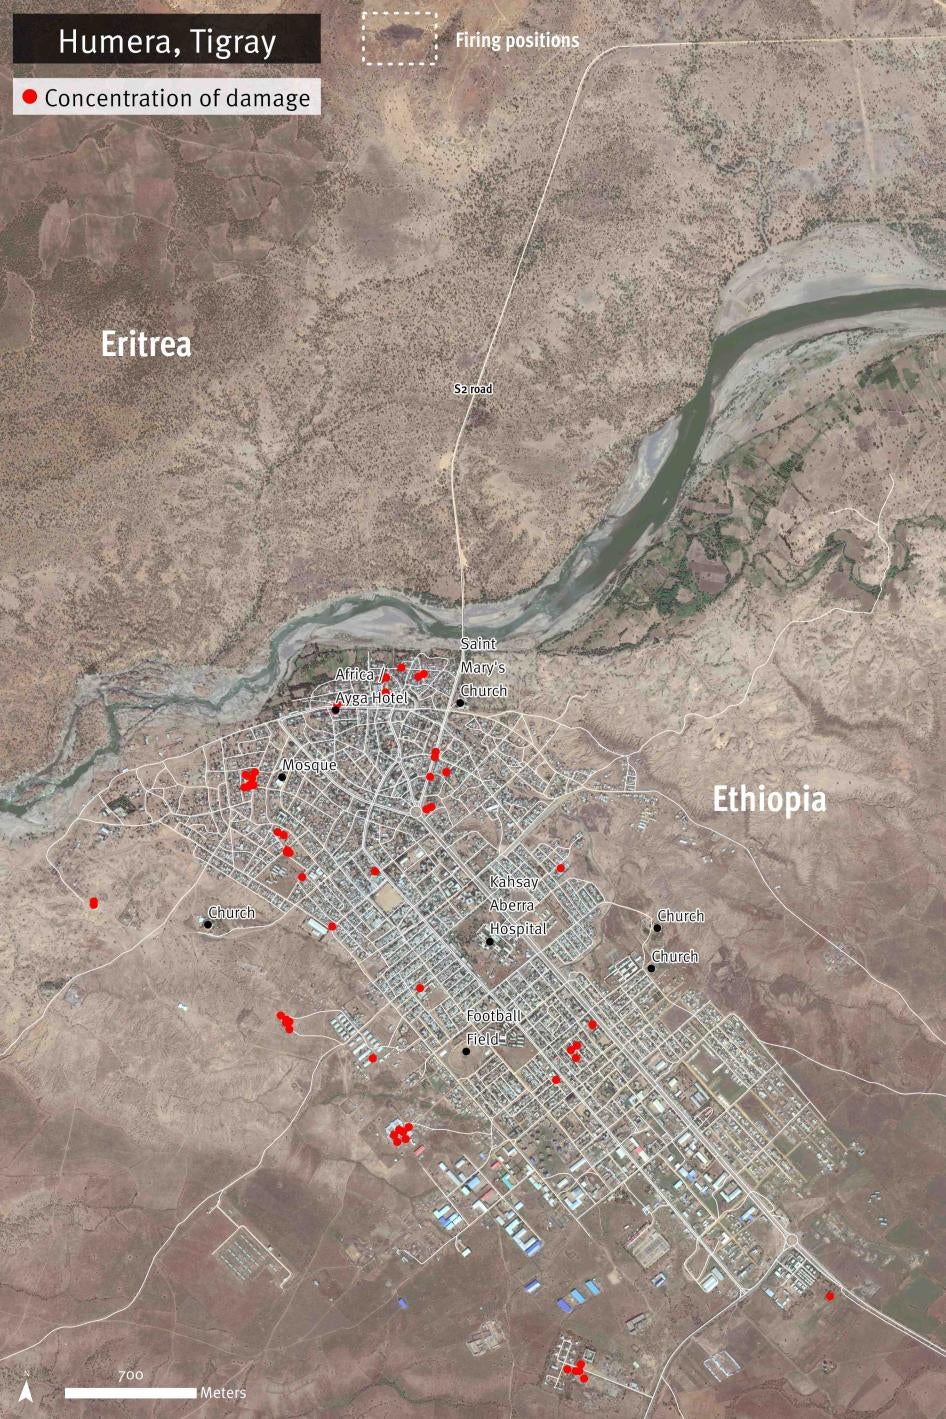 Satellite image recorded on November 10, 2020 shows buildings and streets damaged in Humera town, Tigray region, Ethiopia. The main concentrations of damage are evident on the area south of the primary S2 road. Additional damage is observed on streets northeast of Africa/Ayga Hotel, and a concentration of damaged buildings near Saint Mary’s Church. Warehouses located on the outskirts of the town and other type of structures show severely damaged roofs. The damages reported are most likely an underestimate. 